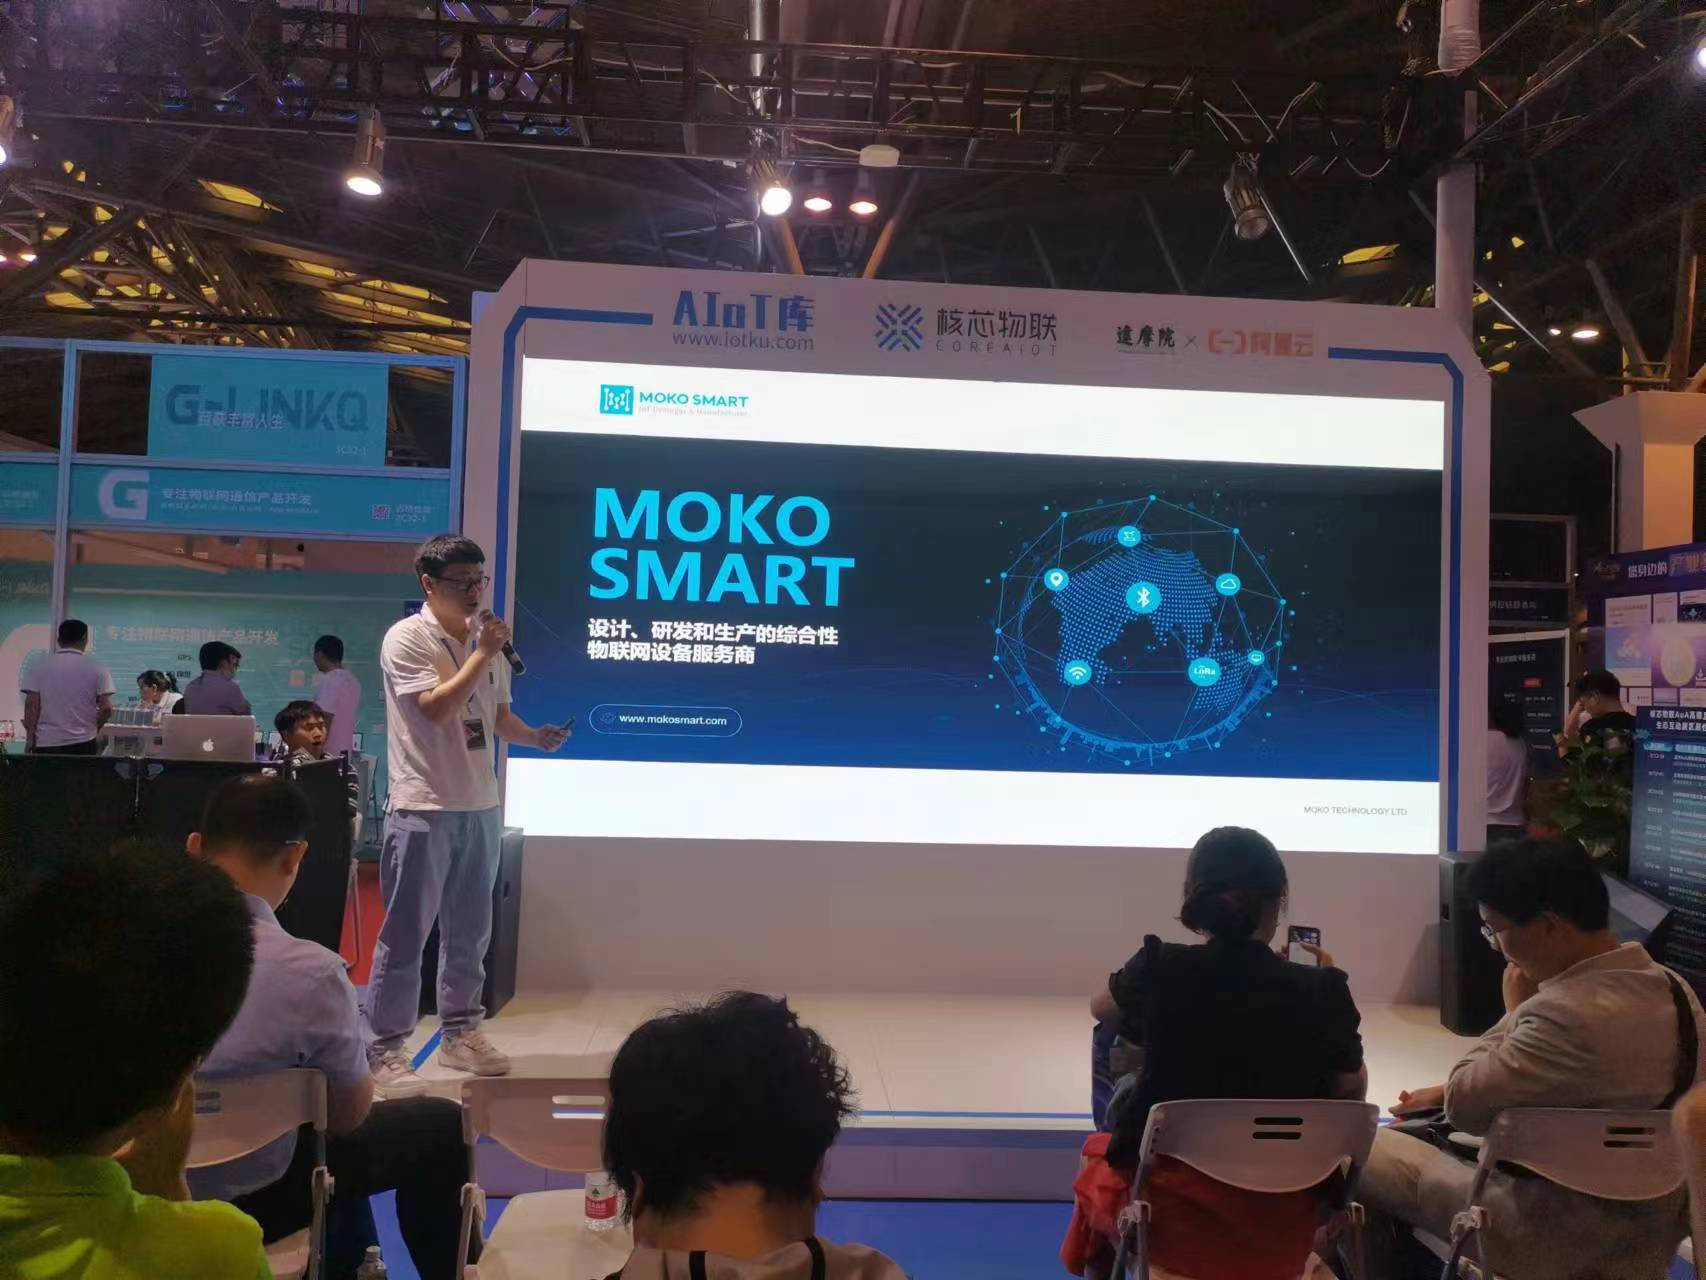 MOKOSmart’s IoT Devices and Use Cases